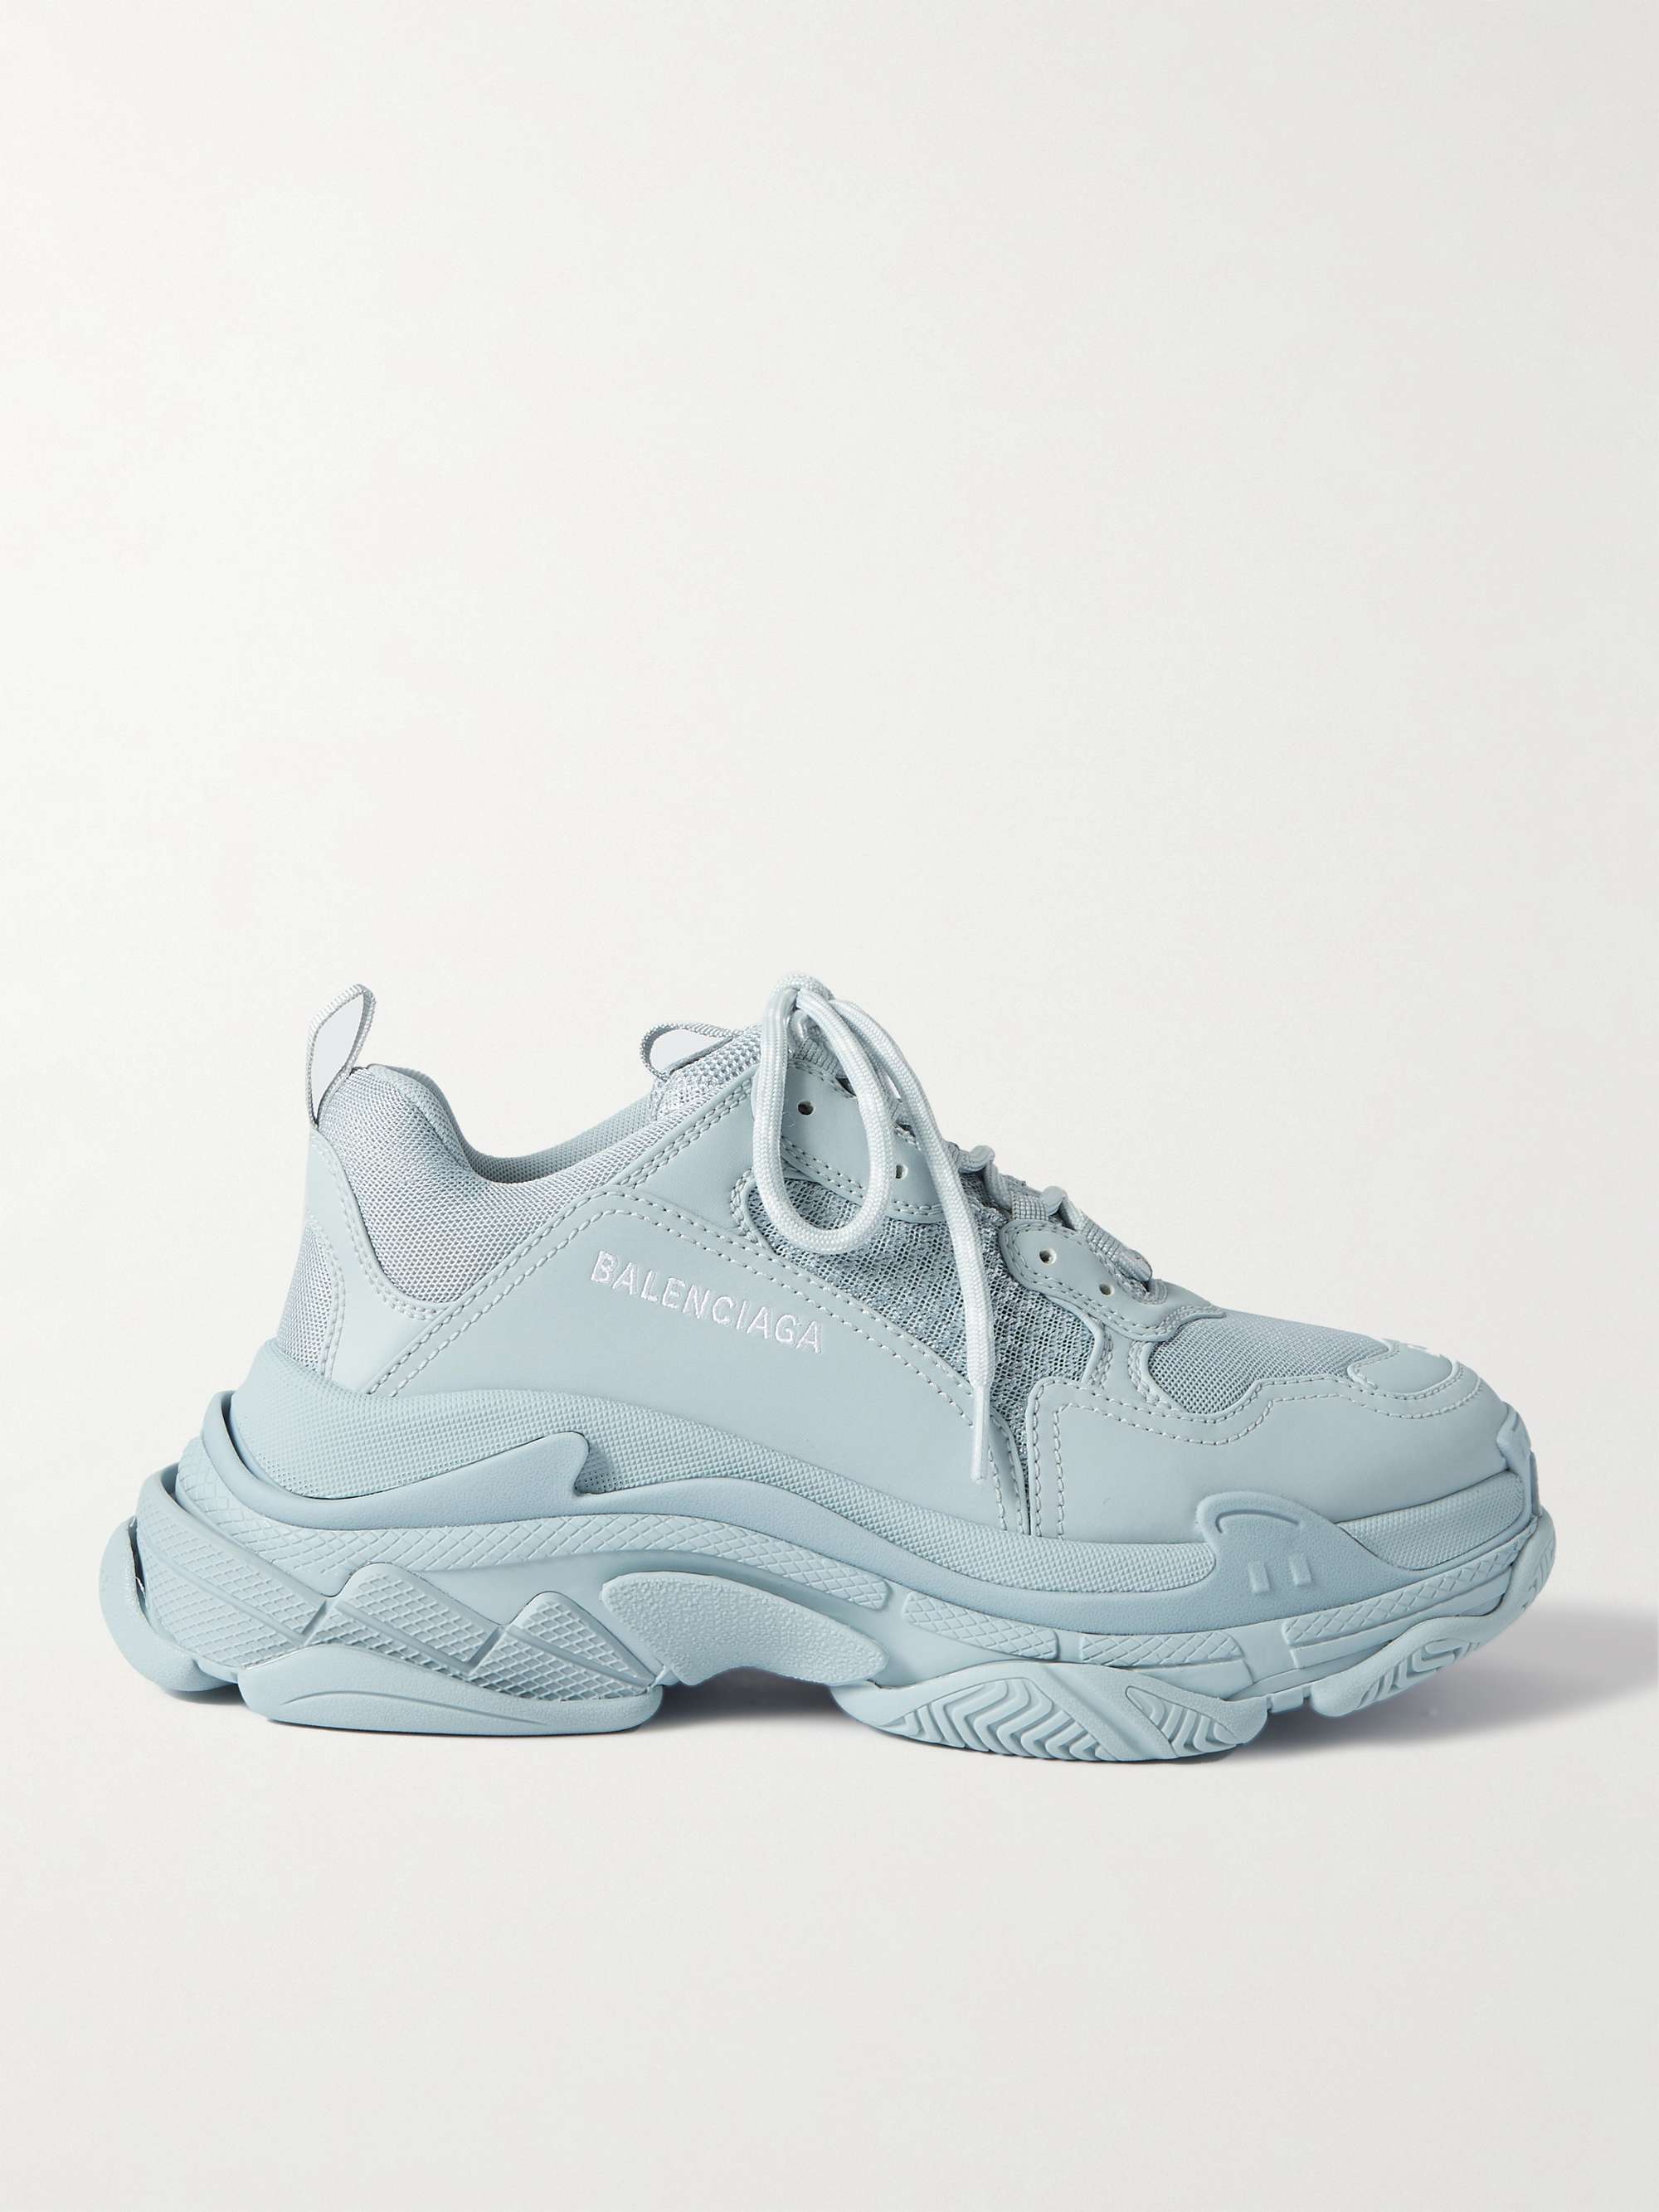 BALENCIAGA Triple S Mesh and Faux Leather Sneakers | MR PORTER